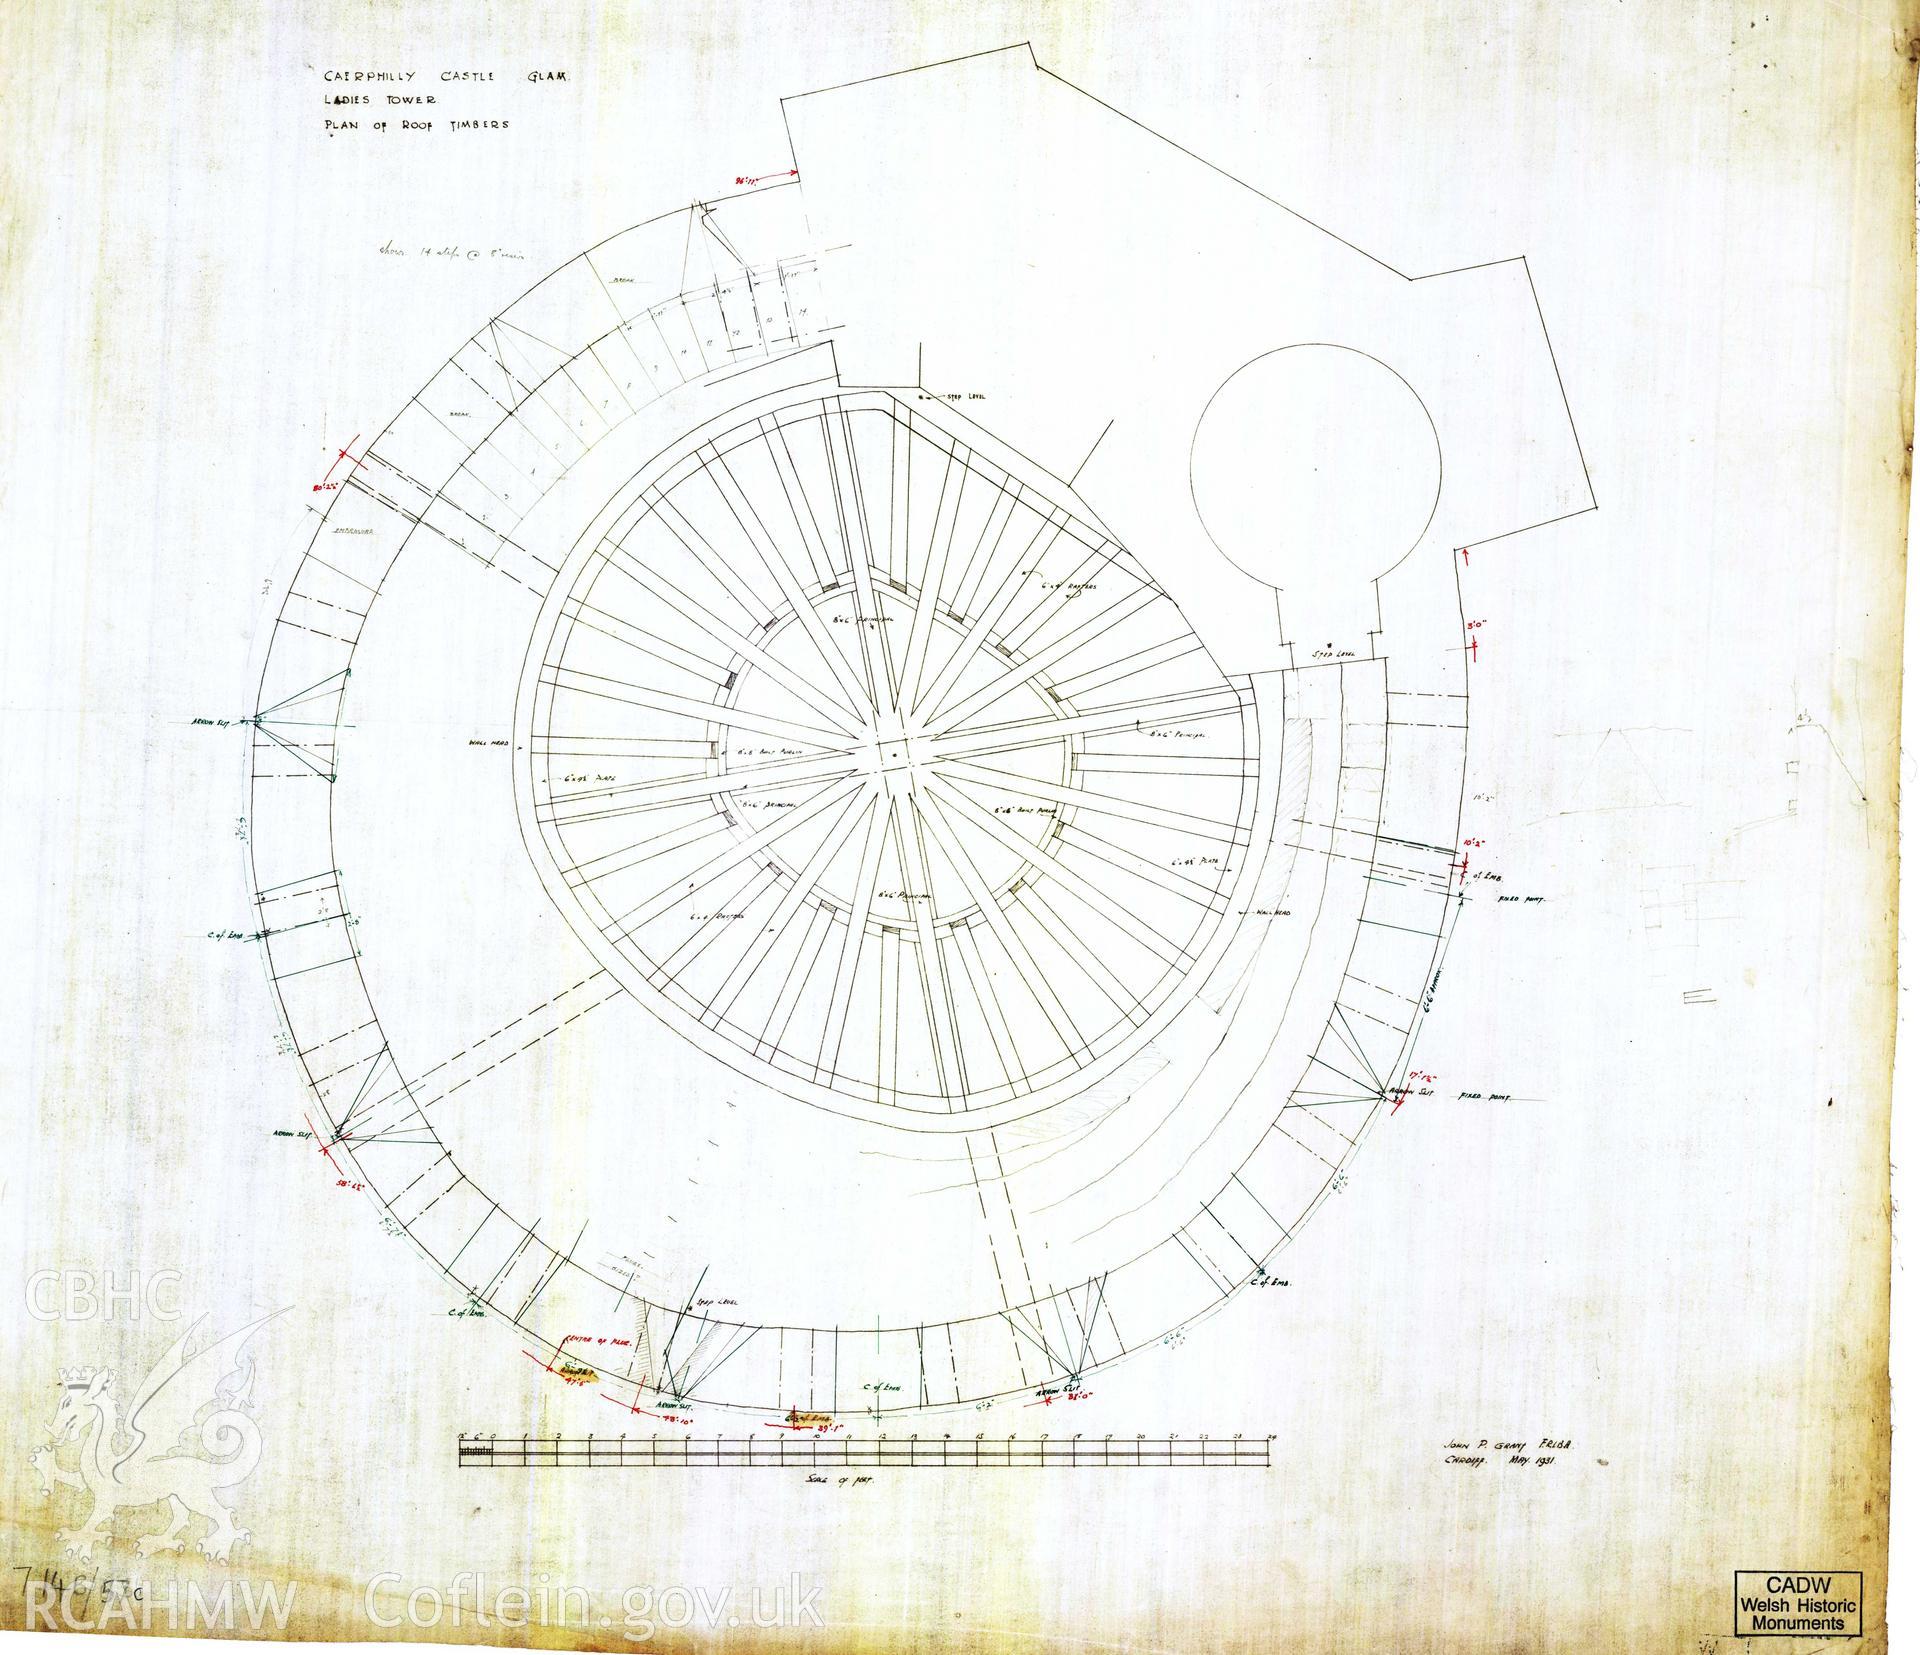 Digital copy of Cadw guardianship monument drawing of Caerphilly Castle. NW tower, roof timbers, plan. Cadw ref. no: 714B/57c. Scale 1:24.  Original drawing withdrawn and returned to Cadw at their request.